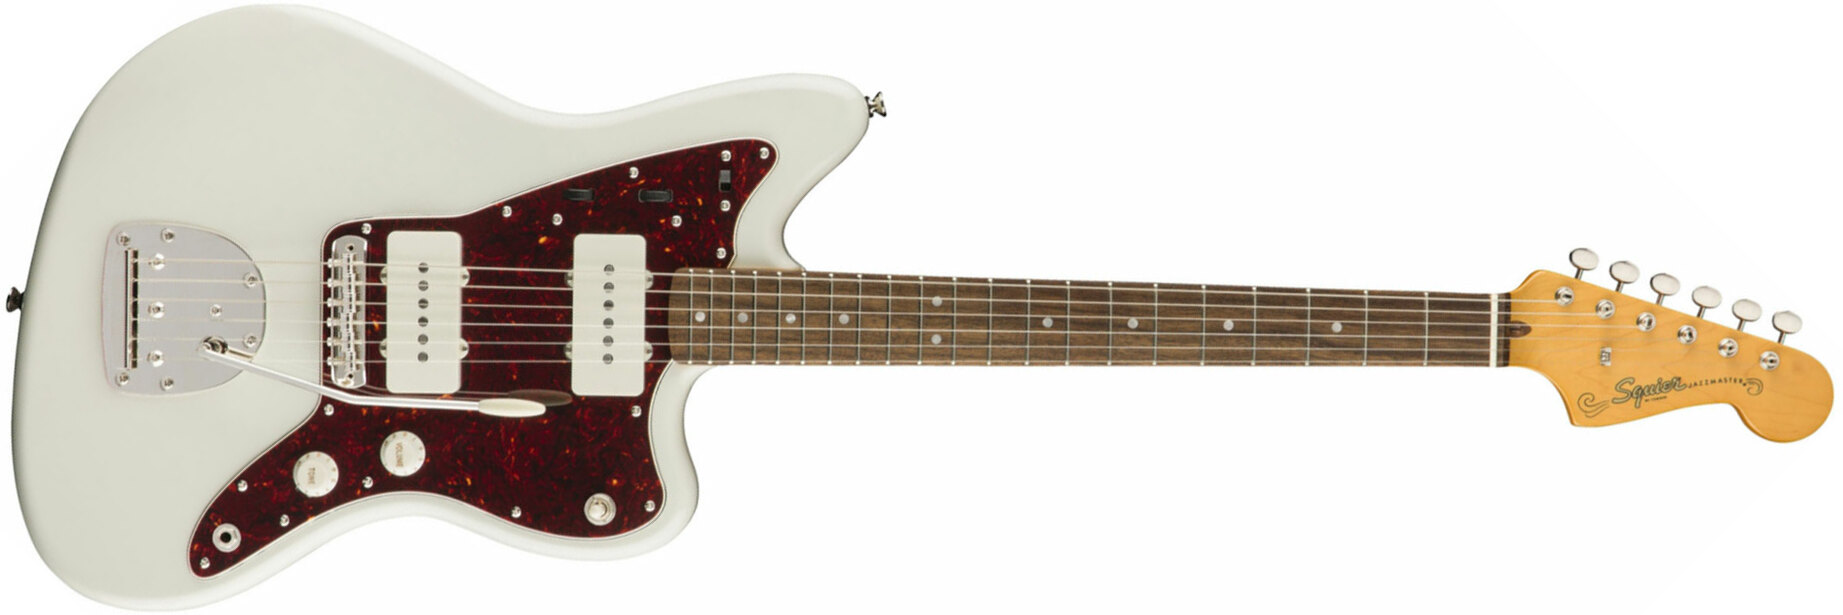 Squier Jazzmaster Classic Vibe 60s 2019 Lau - Olympic White - Retro rock electric guitar - Main picture